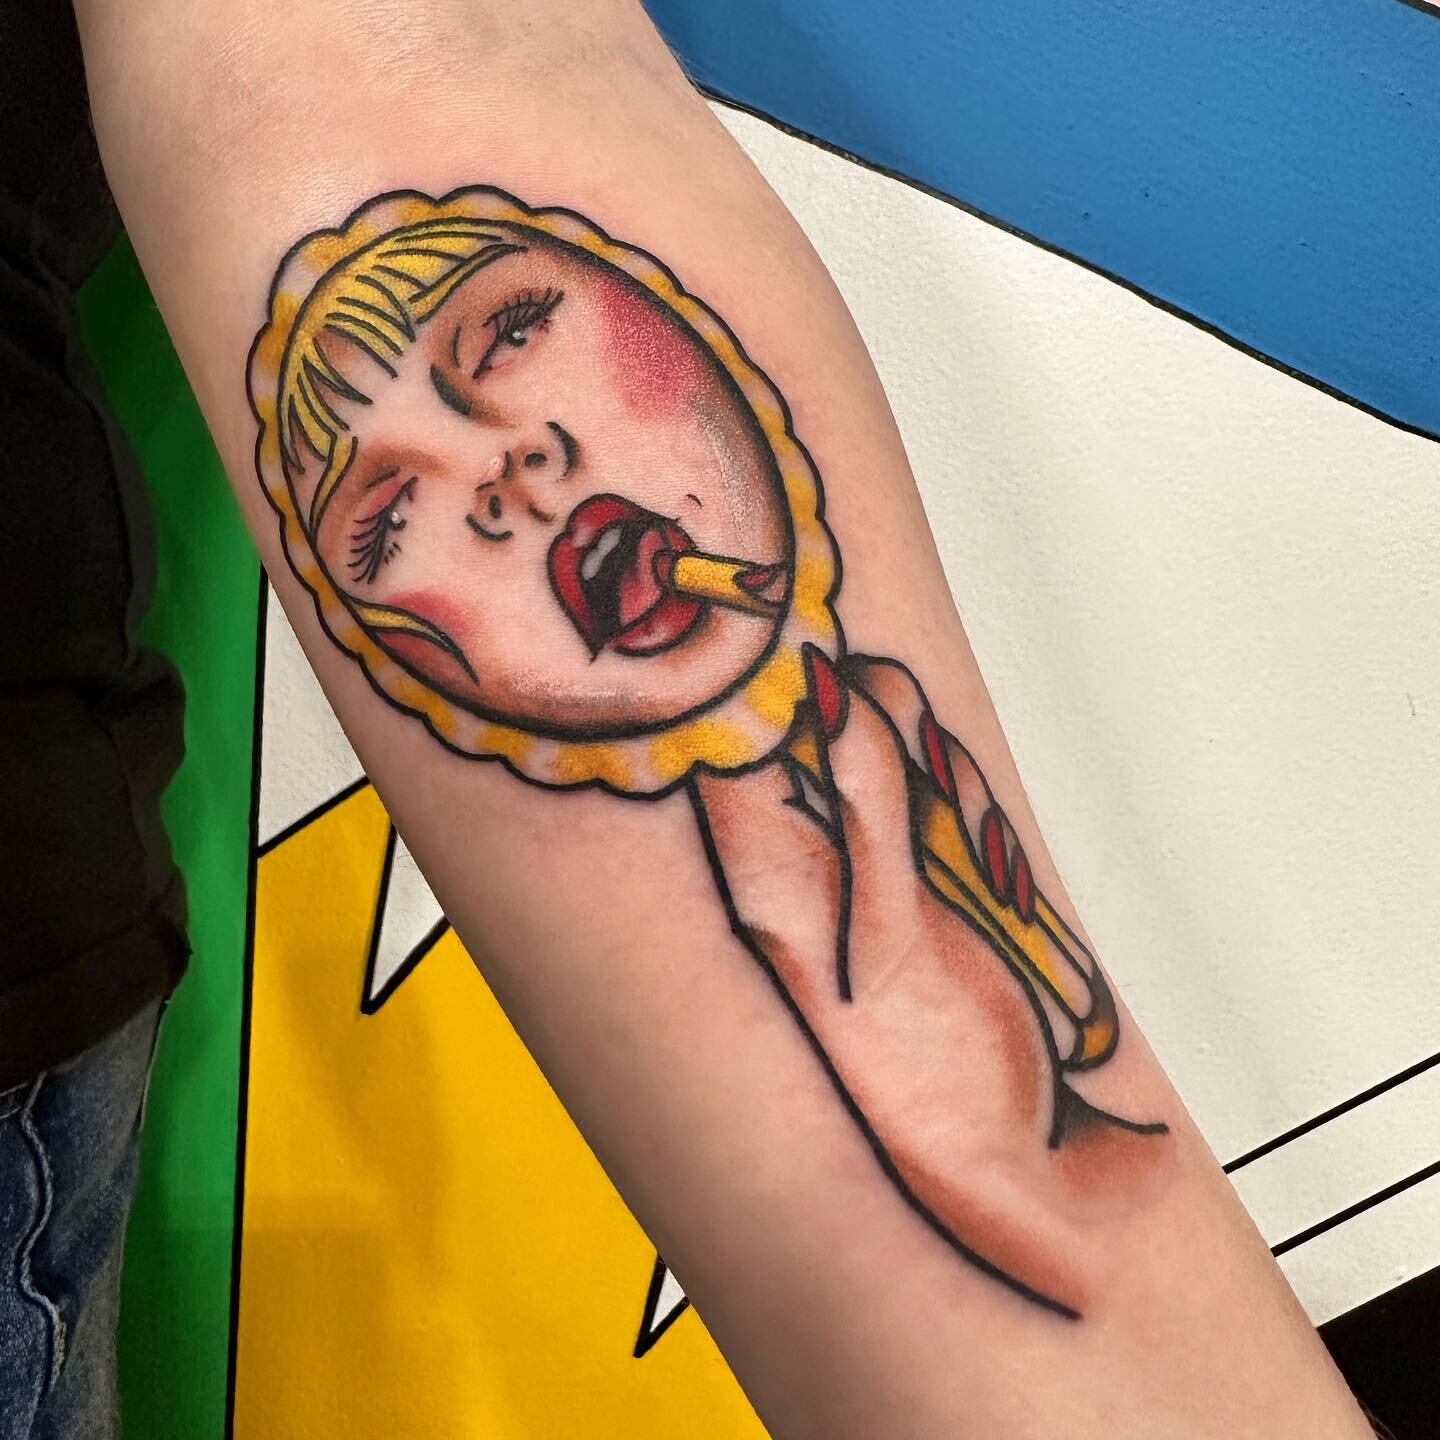 ✨Laura Palmer✨ for the homie @runbrimc! Thank you for the continued trust, so good seeing you! #twinpeaks #twinpeakstattoo #laurapalmer #laurapalmertattoo #tattoo #tattoos #kankakee #kankakeecounty #kankakeetattoo #chicagotattoo #illinoistattoo